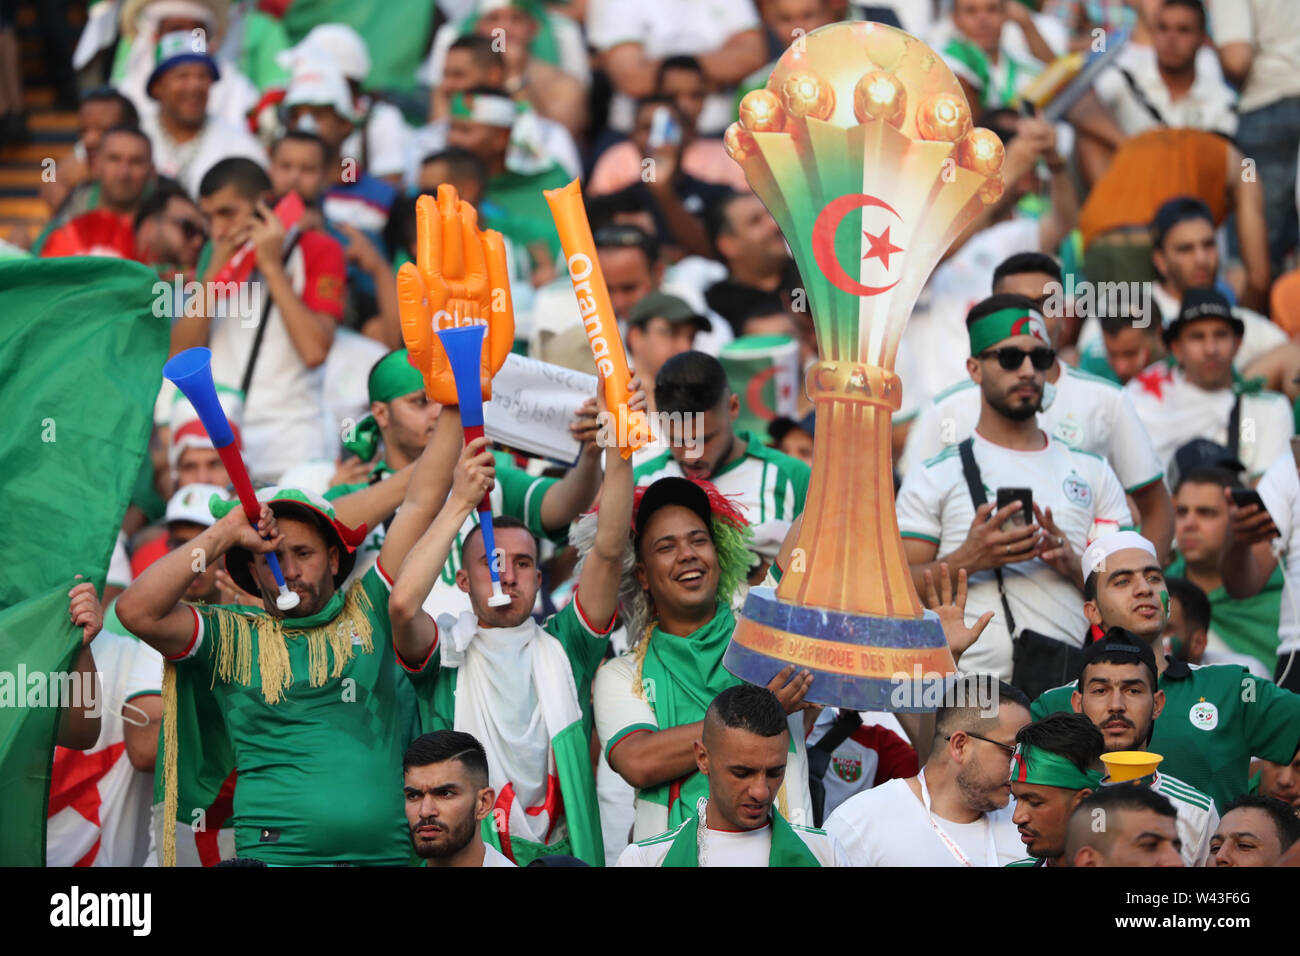 Cairo, Egypt. 19th July, 2019. Algerian fans cheer in the stands prior to the start of the 2019 Africa Cup of Nations final soccer match between Senegal and Algeria at the Cairo International Stadium. Credit: Gehad Hamdy/dpa/Alamy Live News Stock Photo